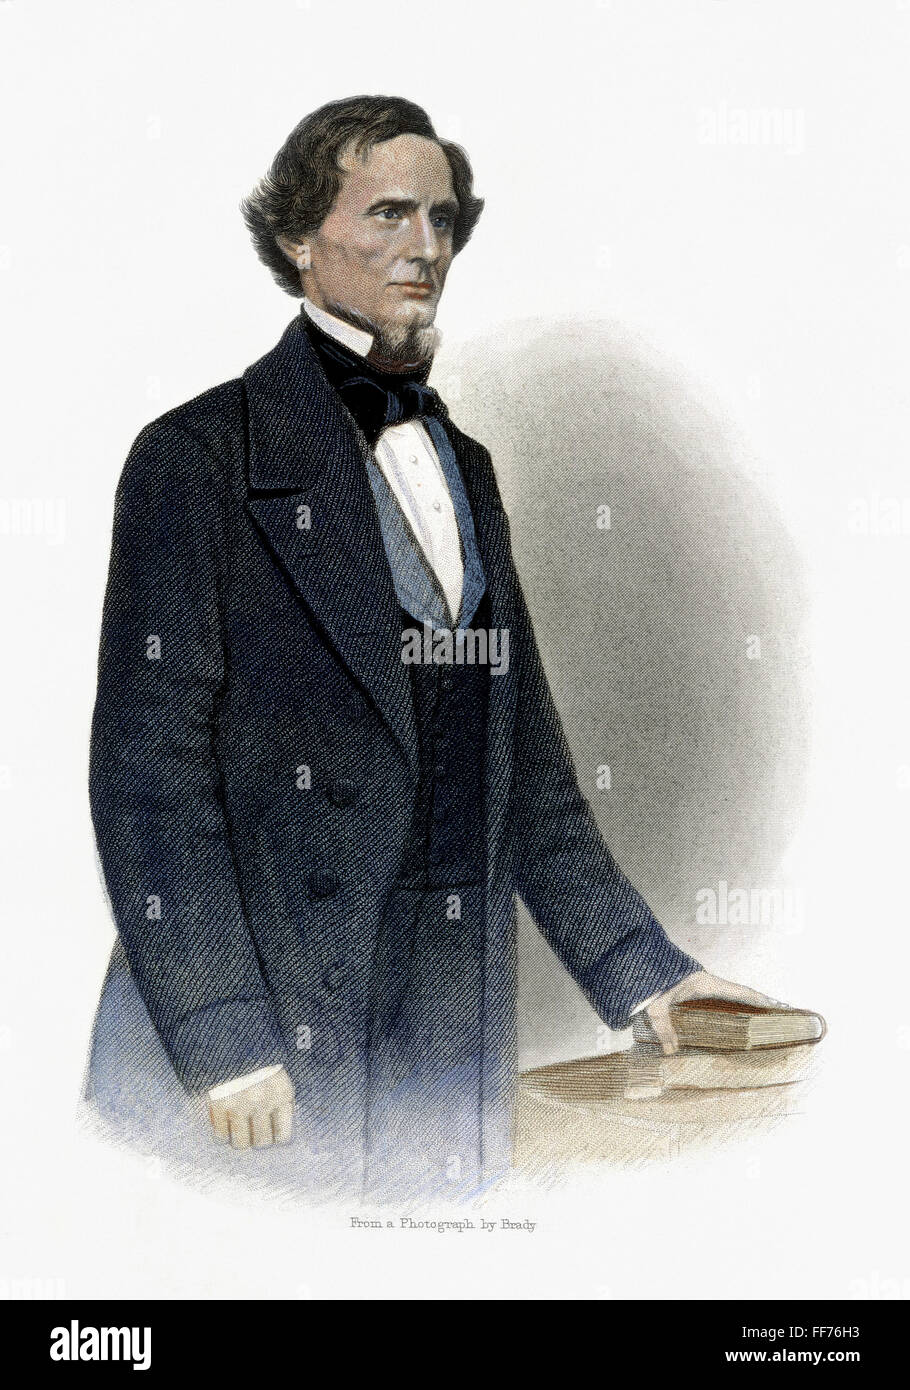 JEFFERSON DAVIS /n(1808-1889). President of the Confederate States of America. Steel engraving, 1866. Stock Photo